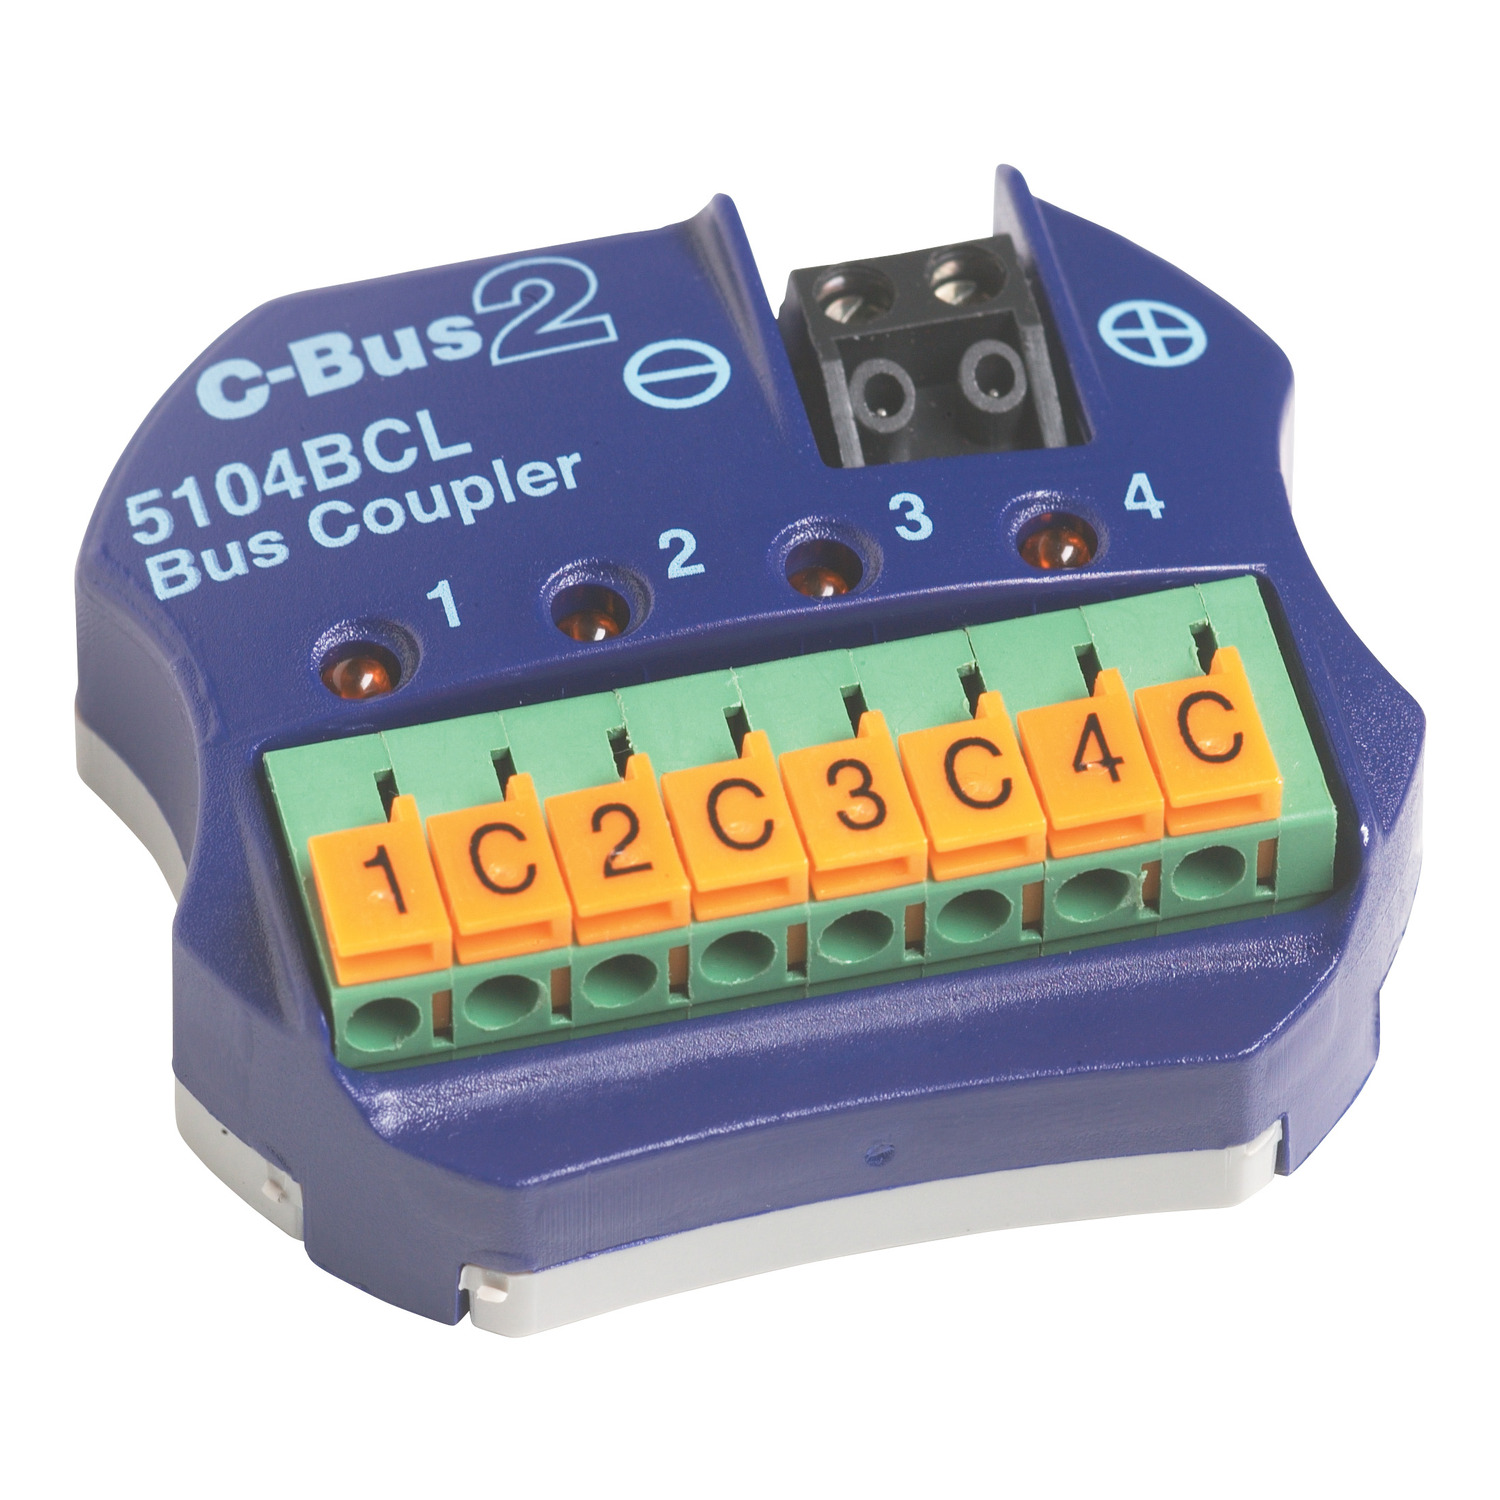 C-Bus Bus Coupler Input Unit, 4 Channel, Support on-Board Scenes